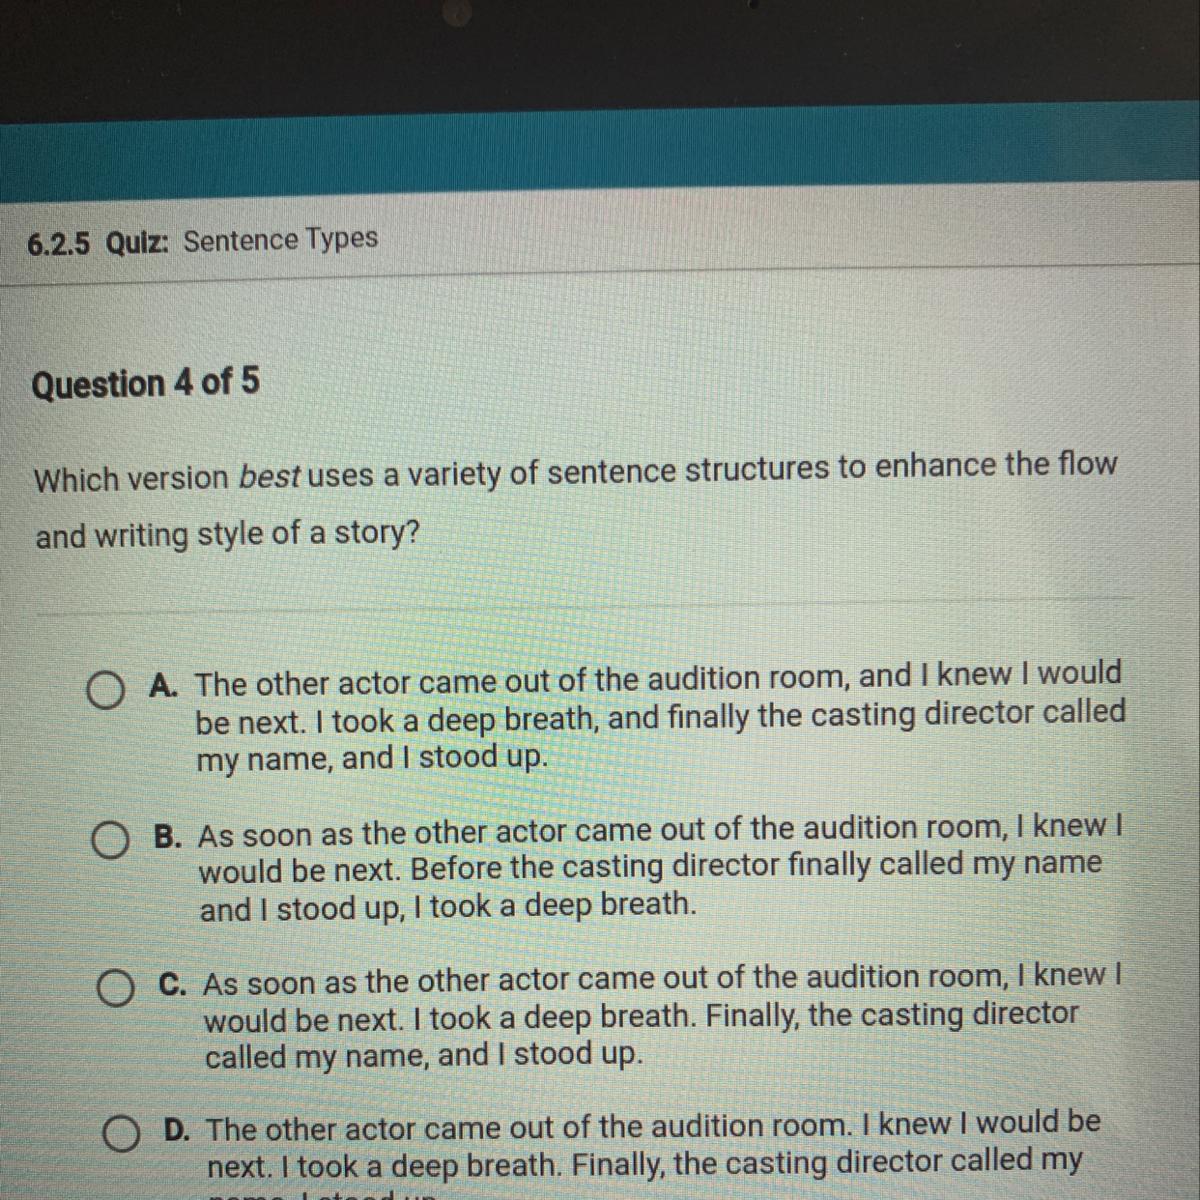 Which Version Best Uses A Variety Of Sentence Structures To Enhance The Flowand Writing Style Of A Story?